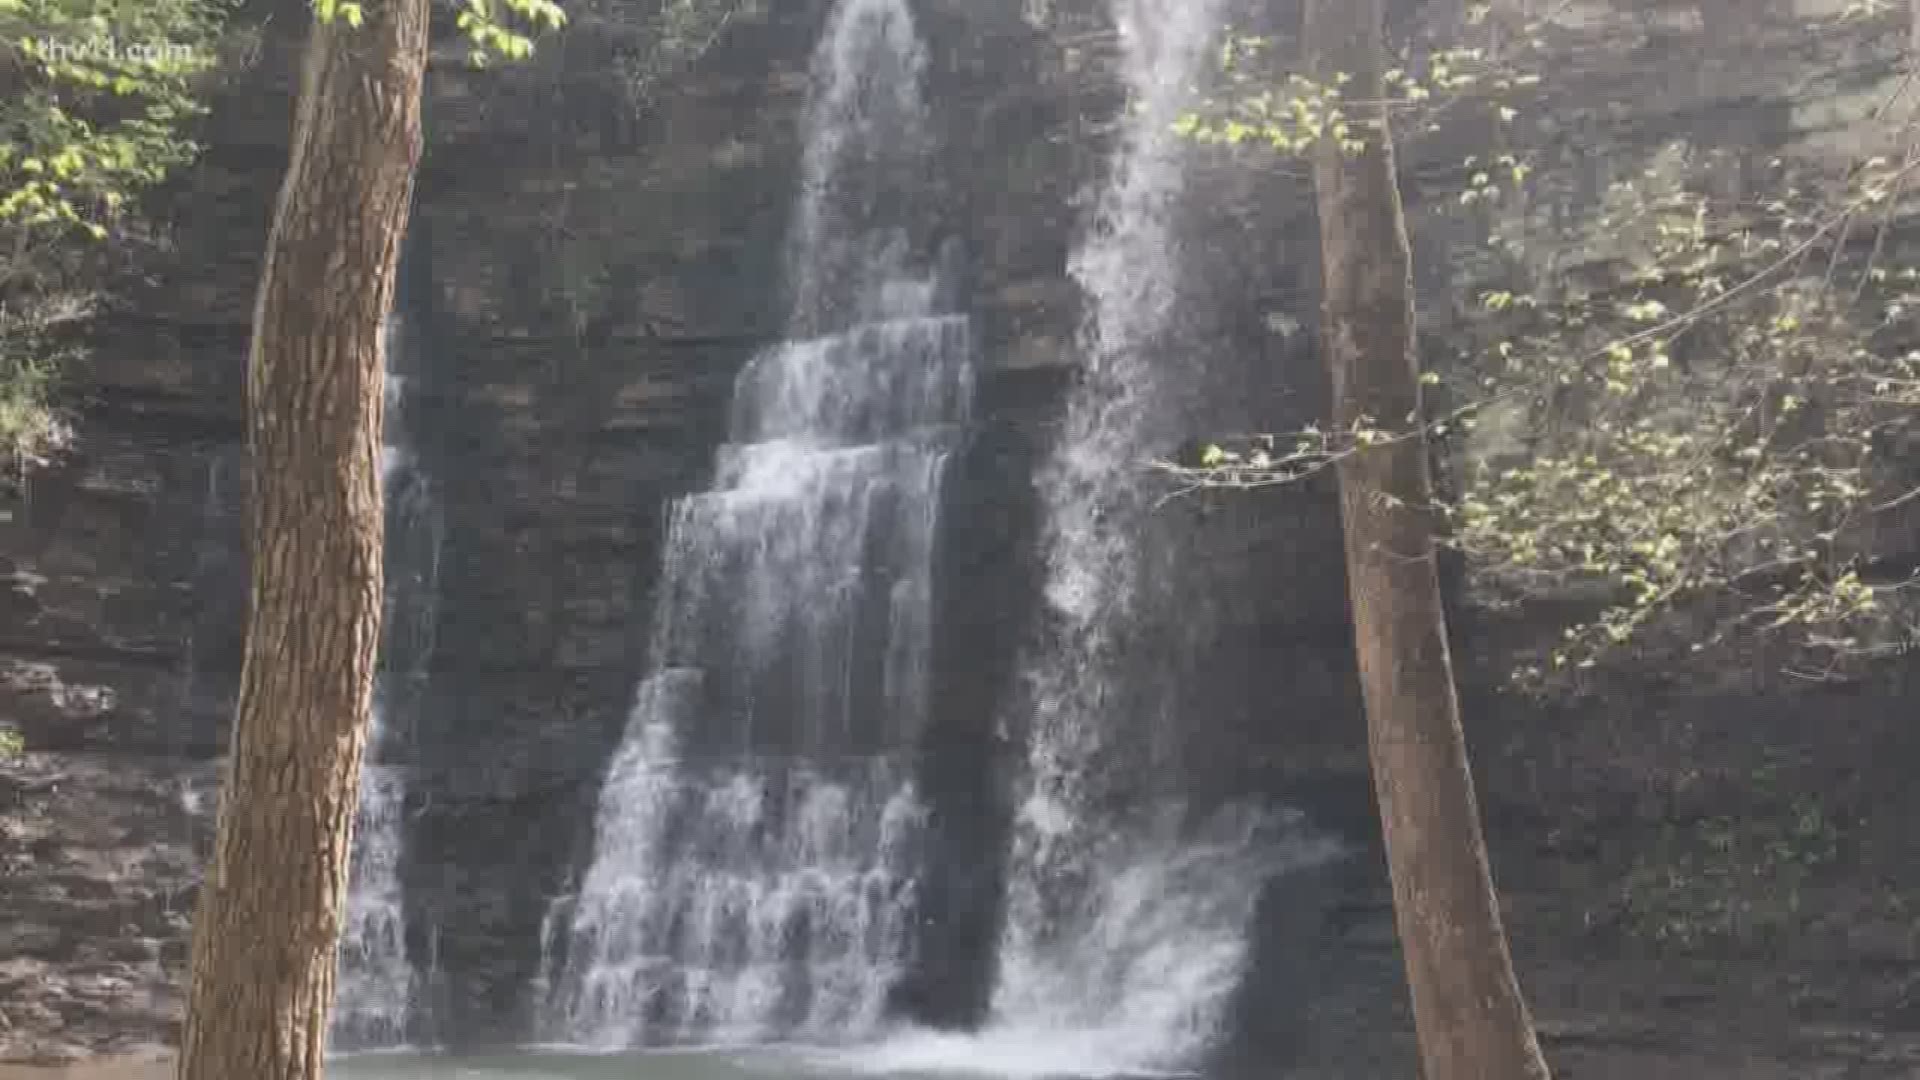 With a very wet spring, it is the perfect time to check out the many spectacular waterfalls that can be found in the Natural State.